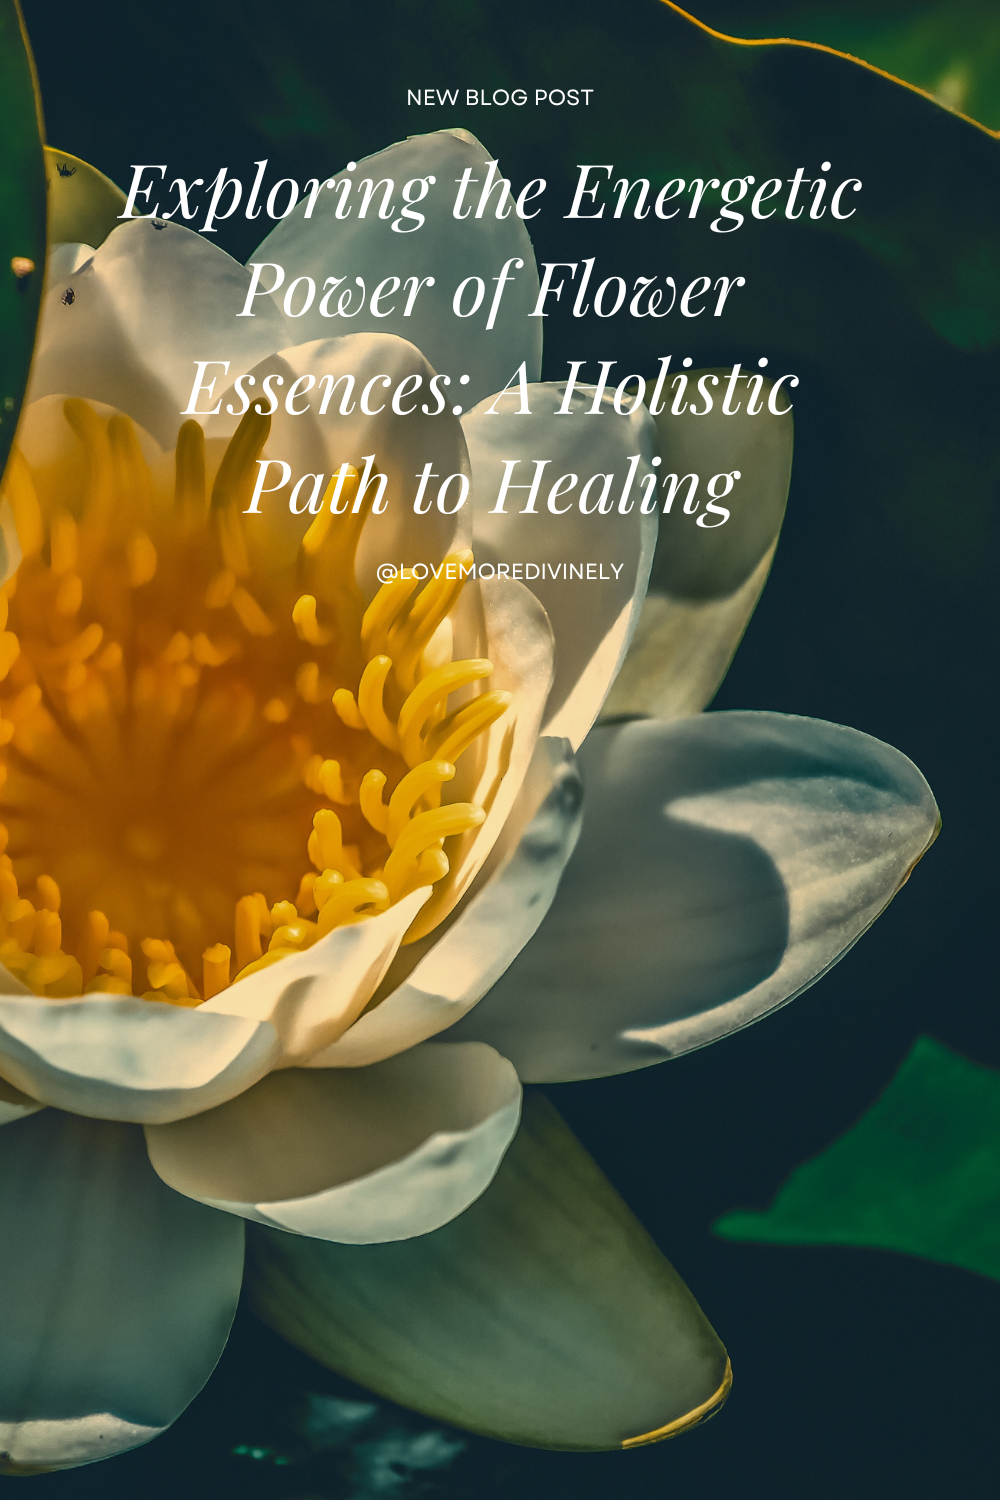 Exploring the Energetic Power of Flower Essences: A Holistic Path to Healing